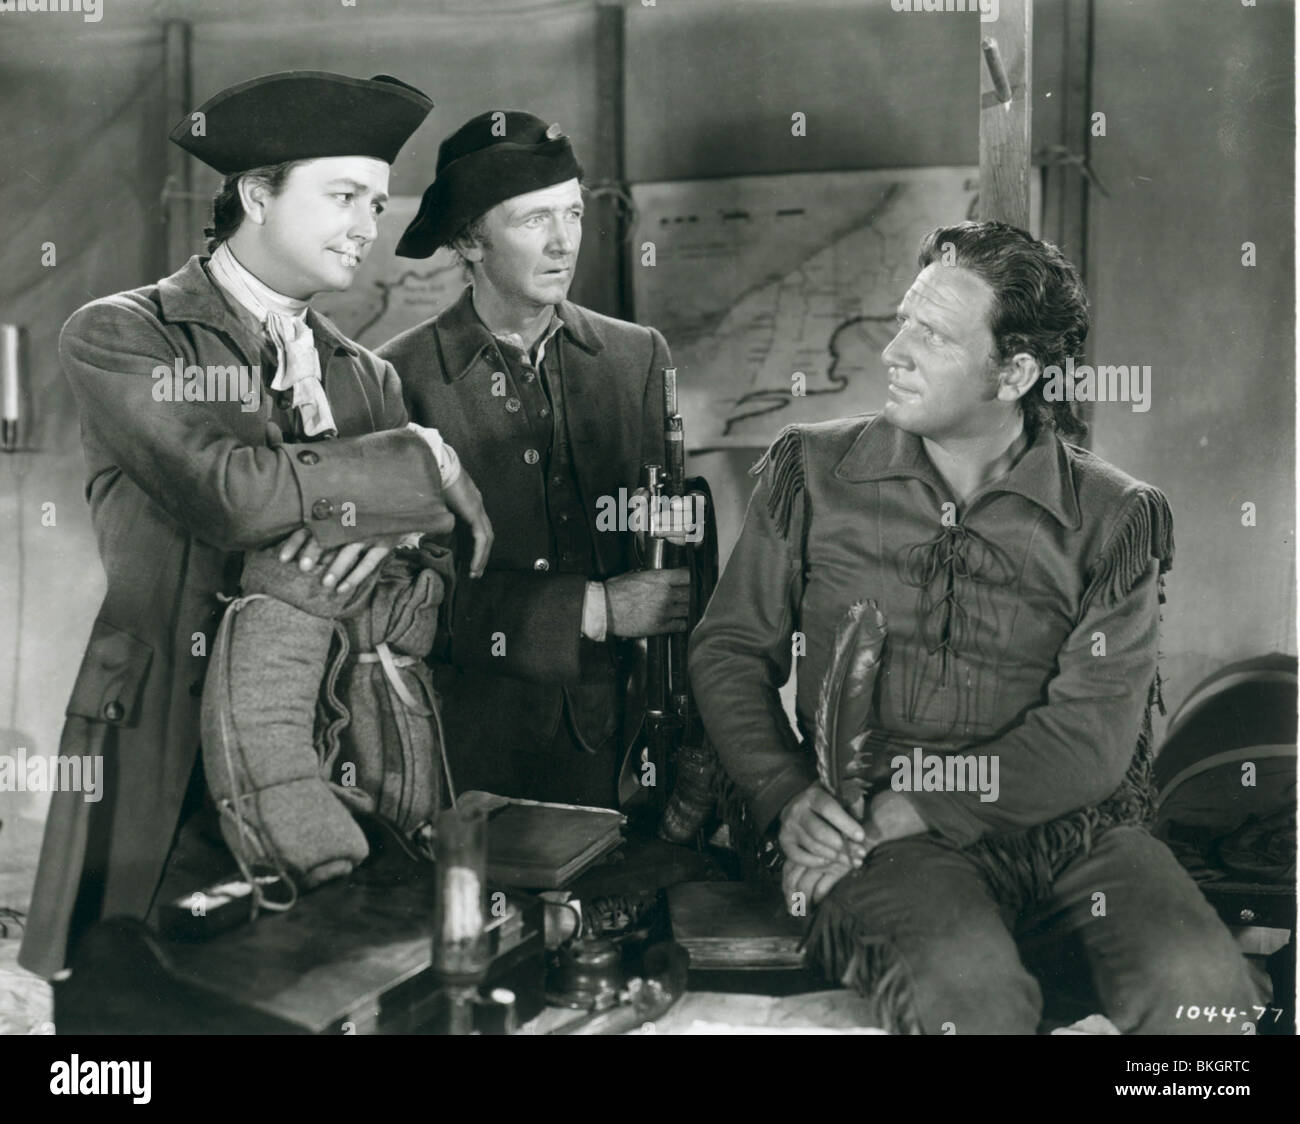 NORTHWEST PASSAGE (1940) ROBERT YOUNG, WALTER BRENNAN, SPENCER TRACY NWP 012P Stock Photo